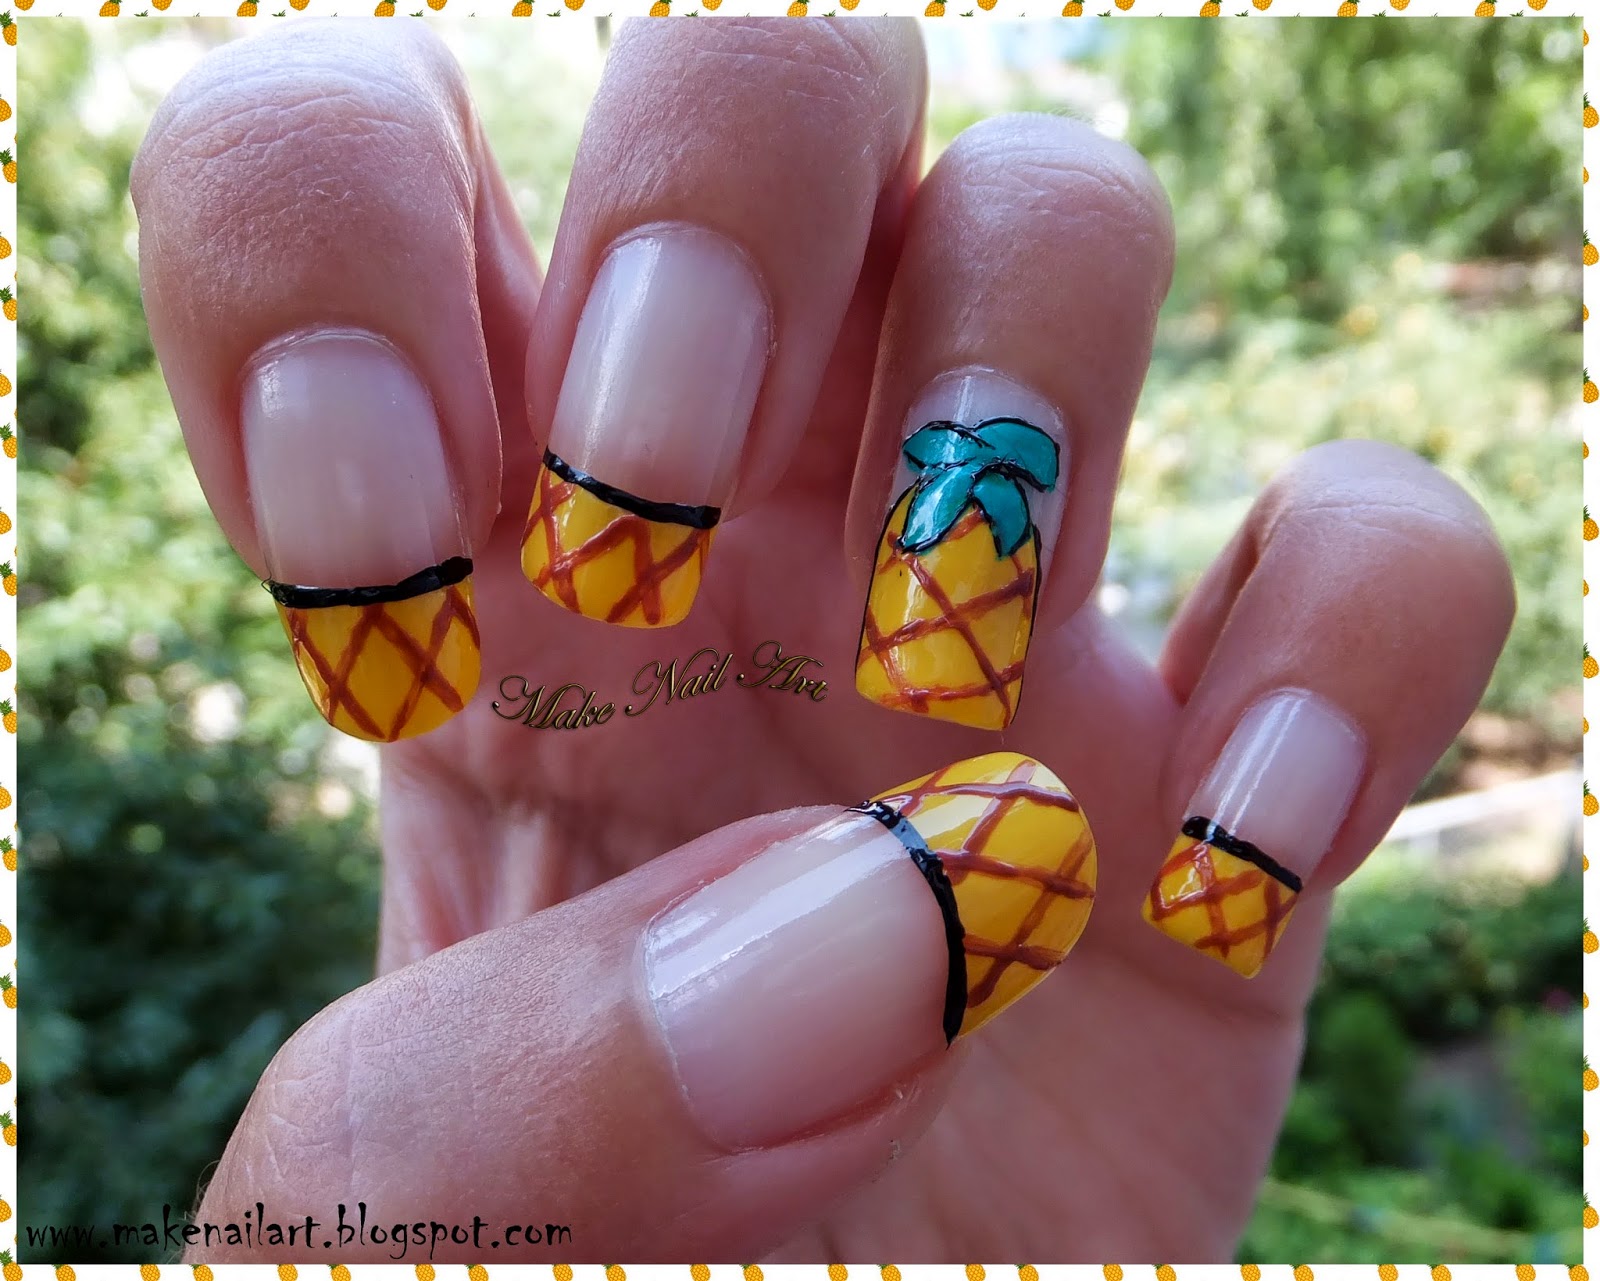 4. Pineapple French Nail Art - wide 3